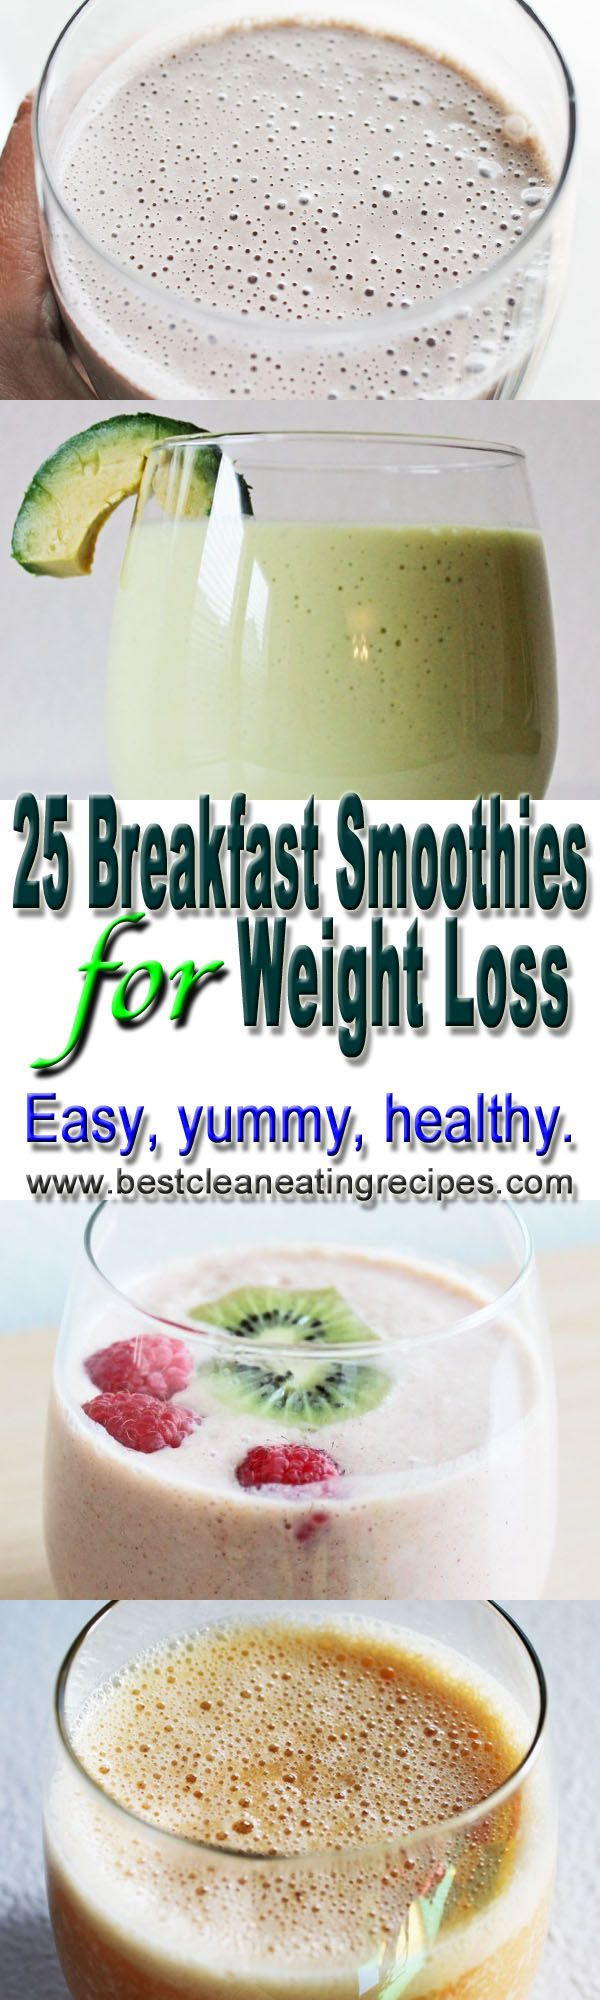 Breakfast Shakes For Weight Loss Recipes
 Creative Mornings 25 Breakfast Smoothie Recipes for